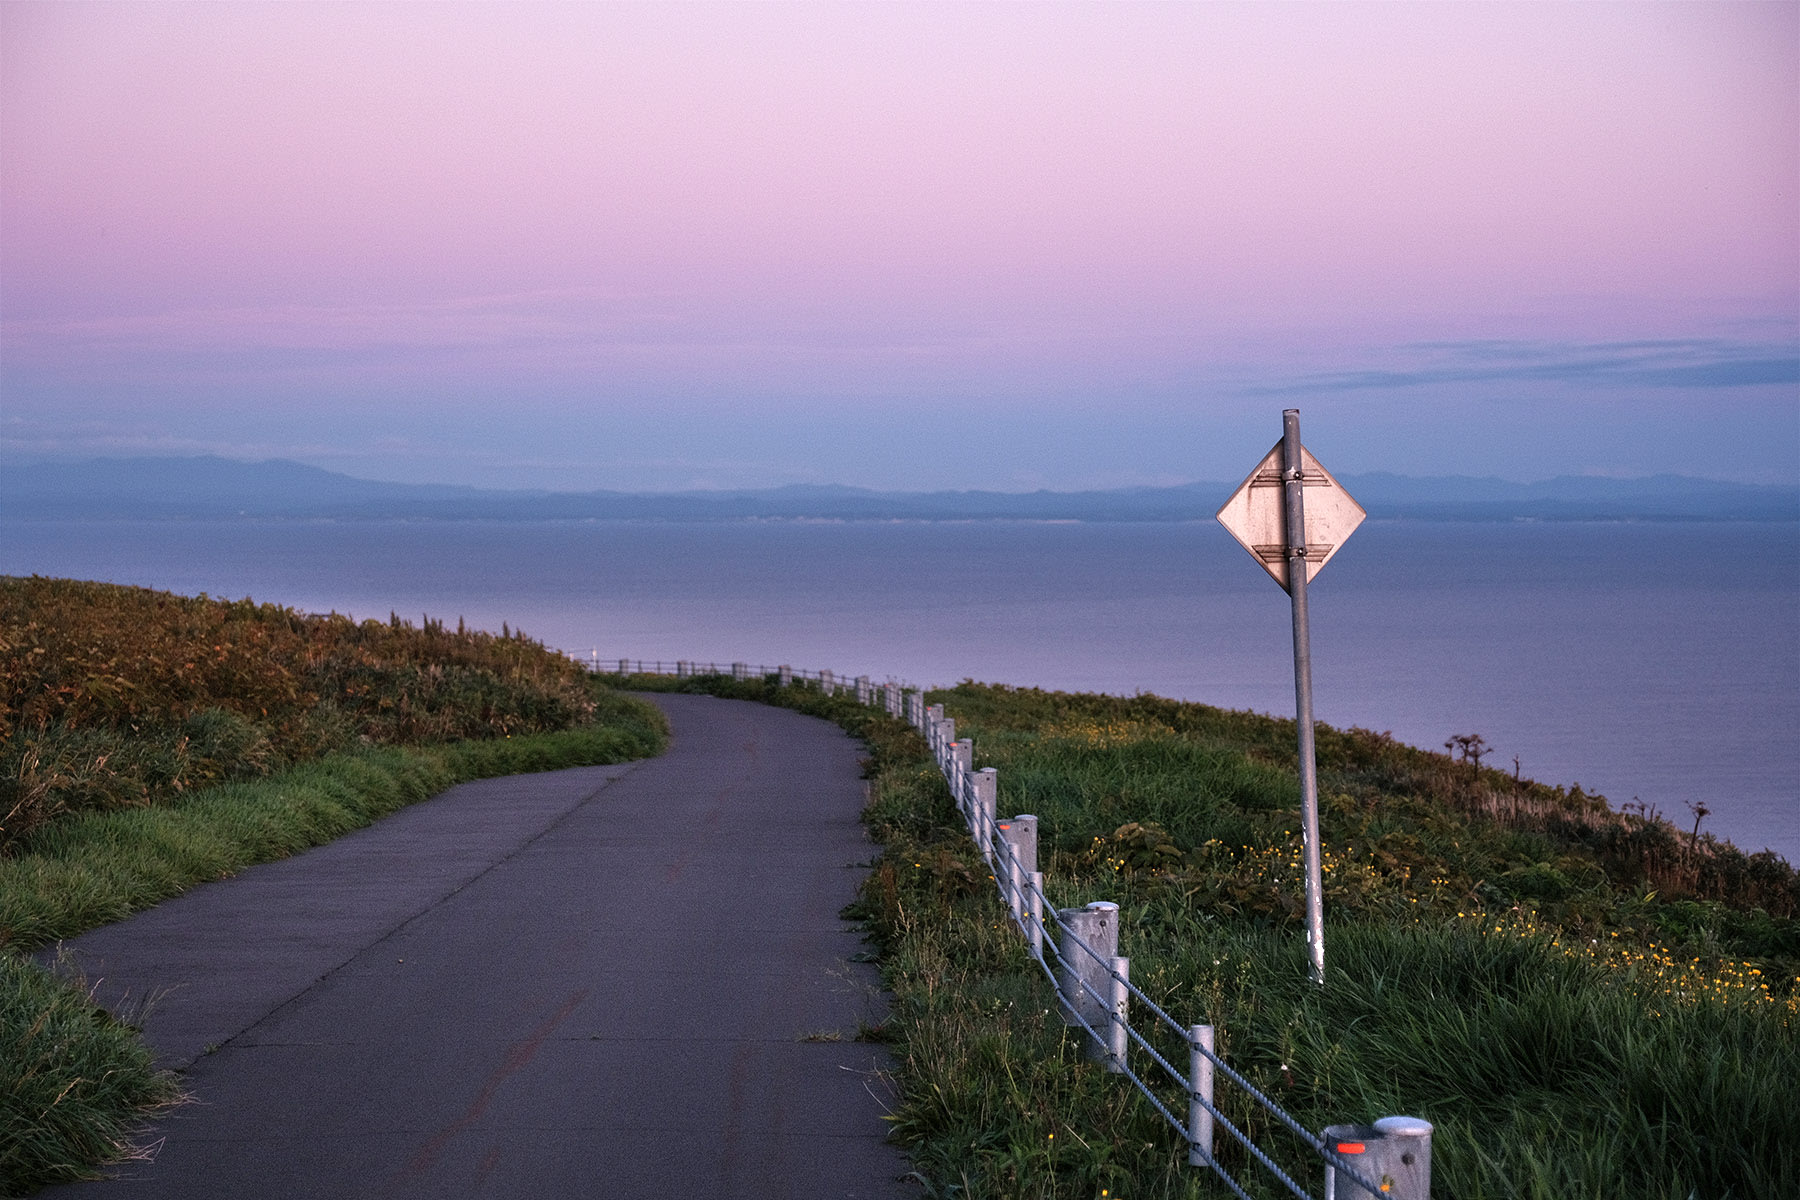 A narrow road runs along the seaside near Haboro in Hokkaido. It is evening and the sky is a pastel pink colour.